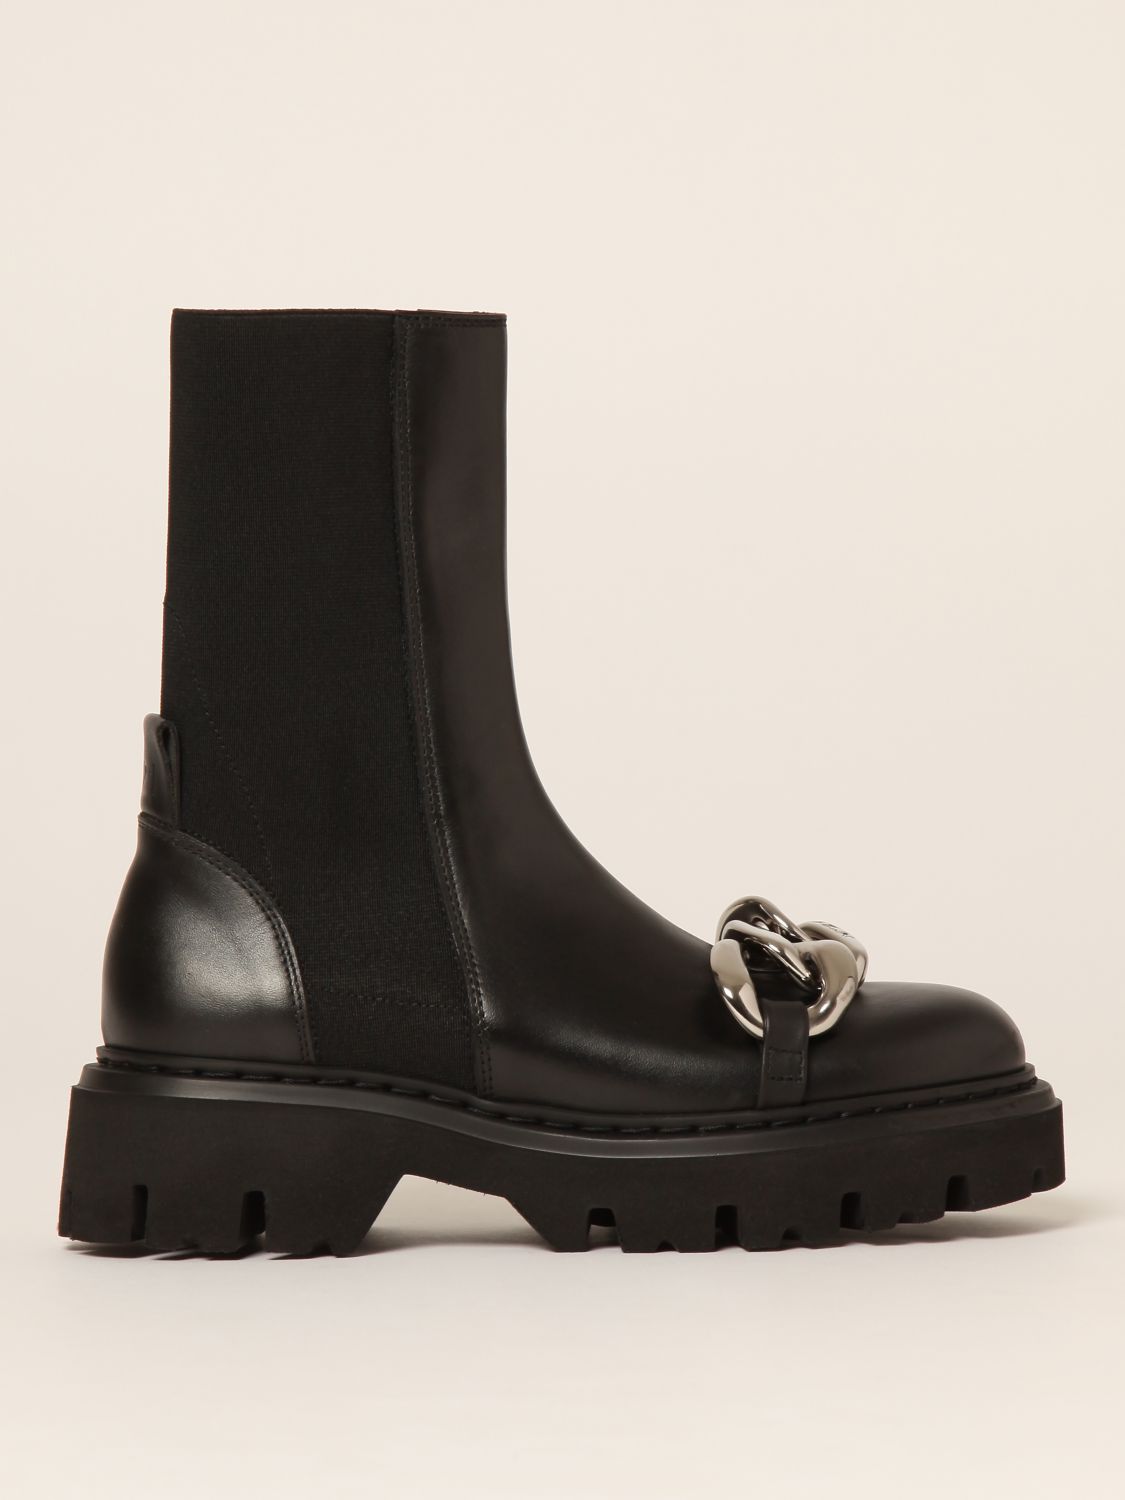 n 21 boots,OFF 59%,www.concordehotels.com.tr